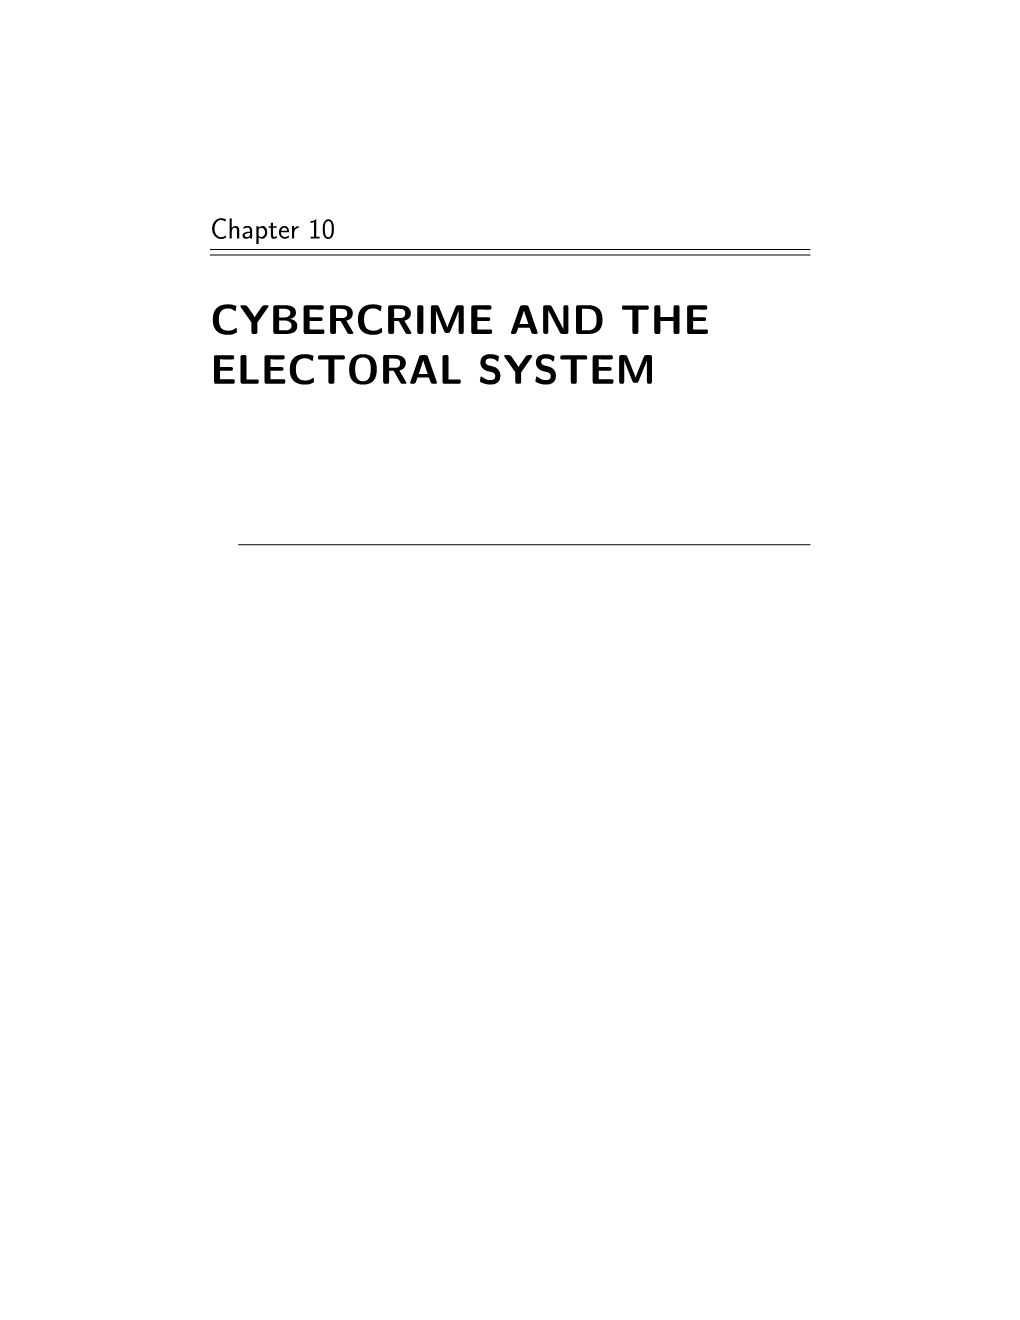 Cybercrime and the Electoral System